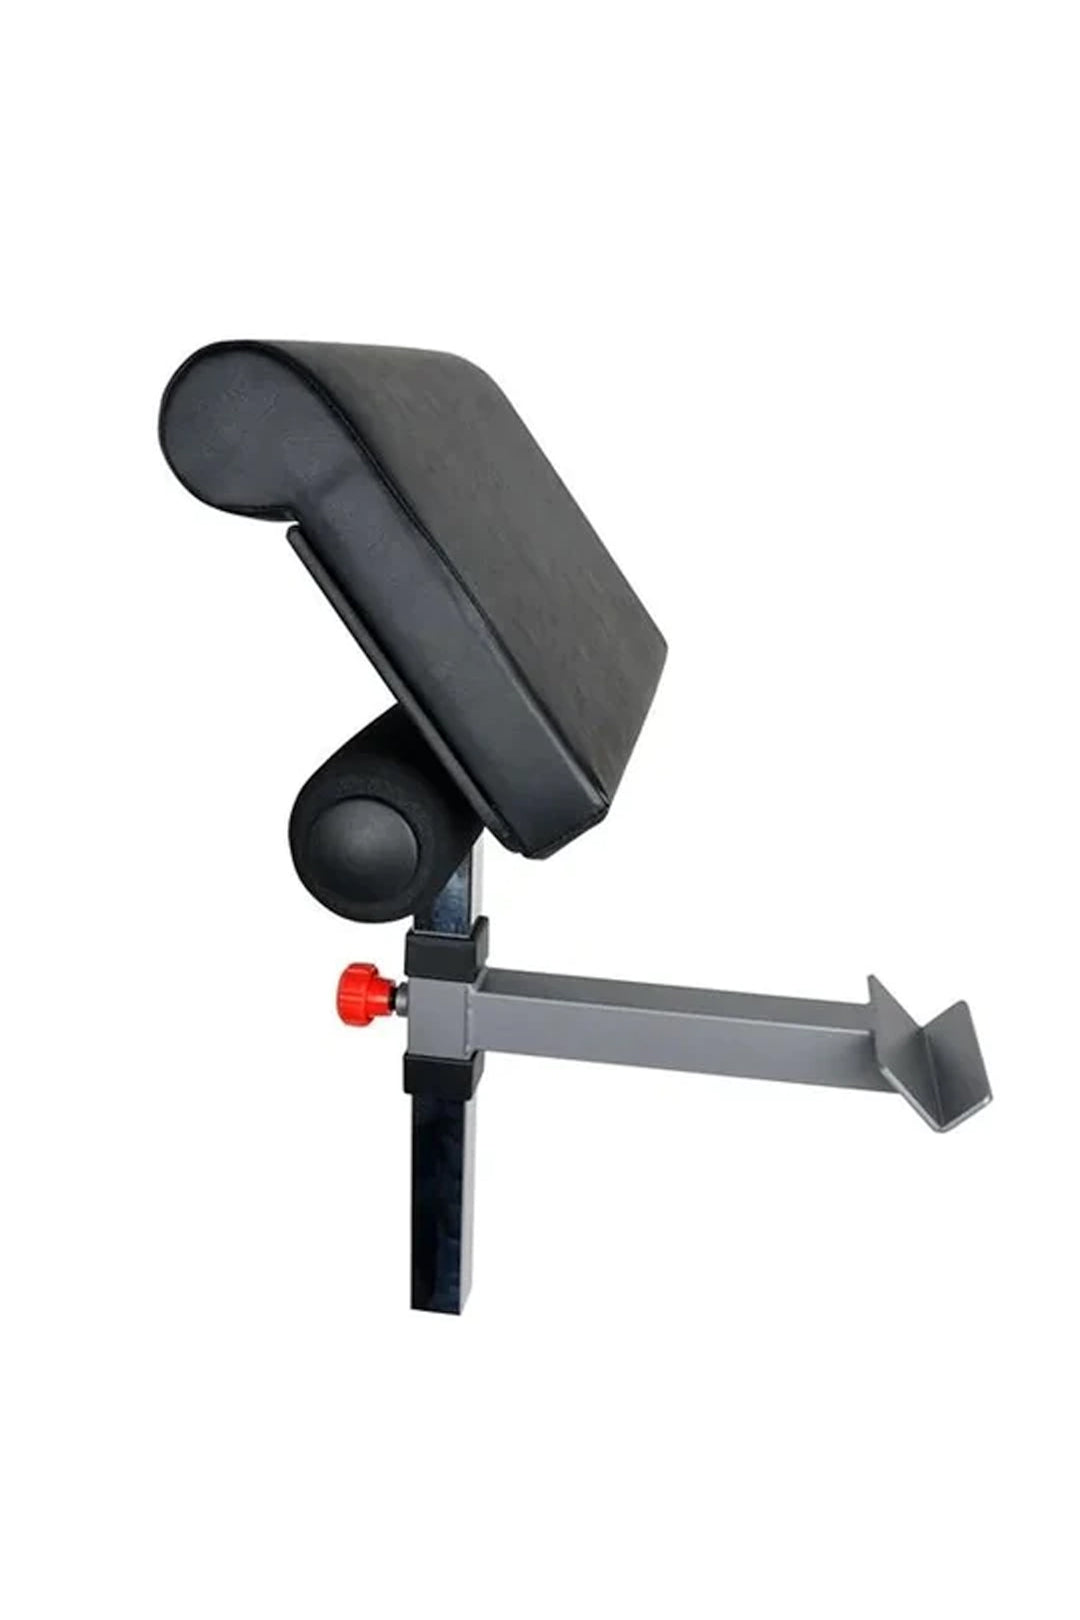 Black vinyl preacher pad attachment with red adjustment dial